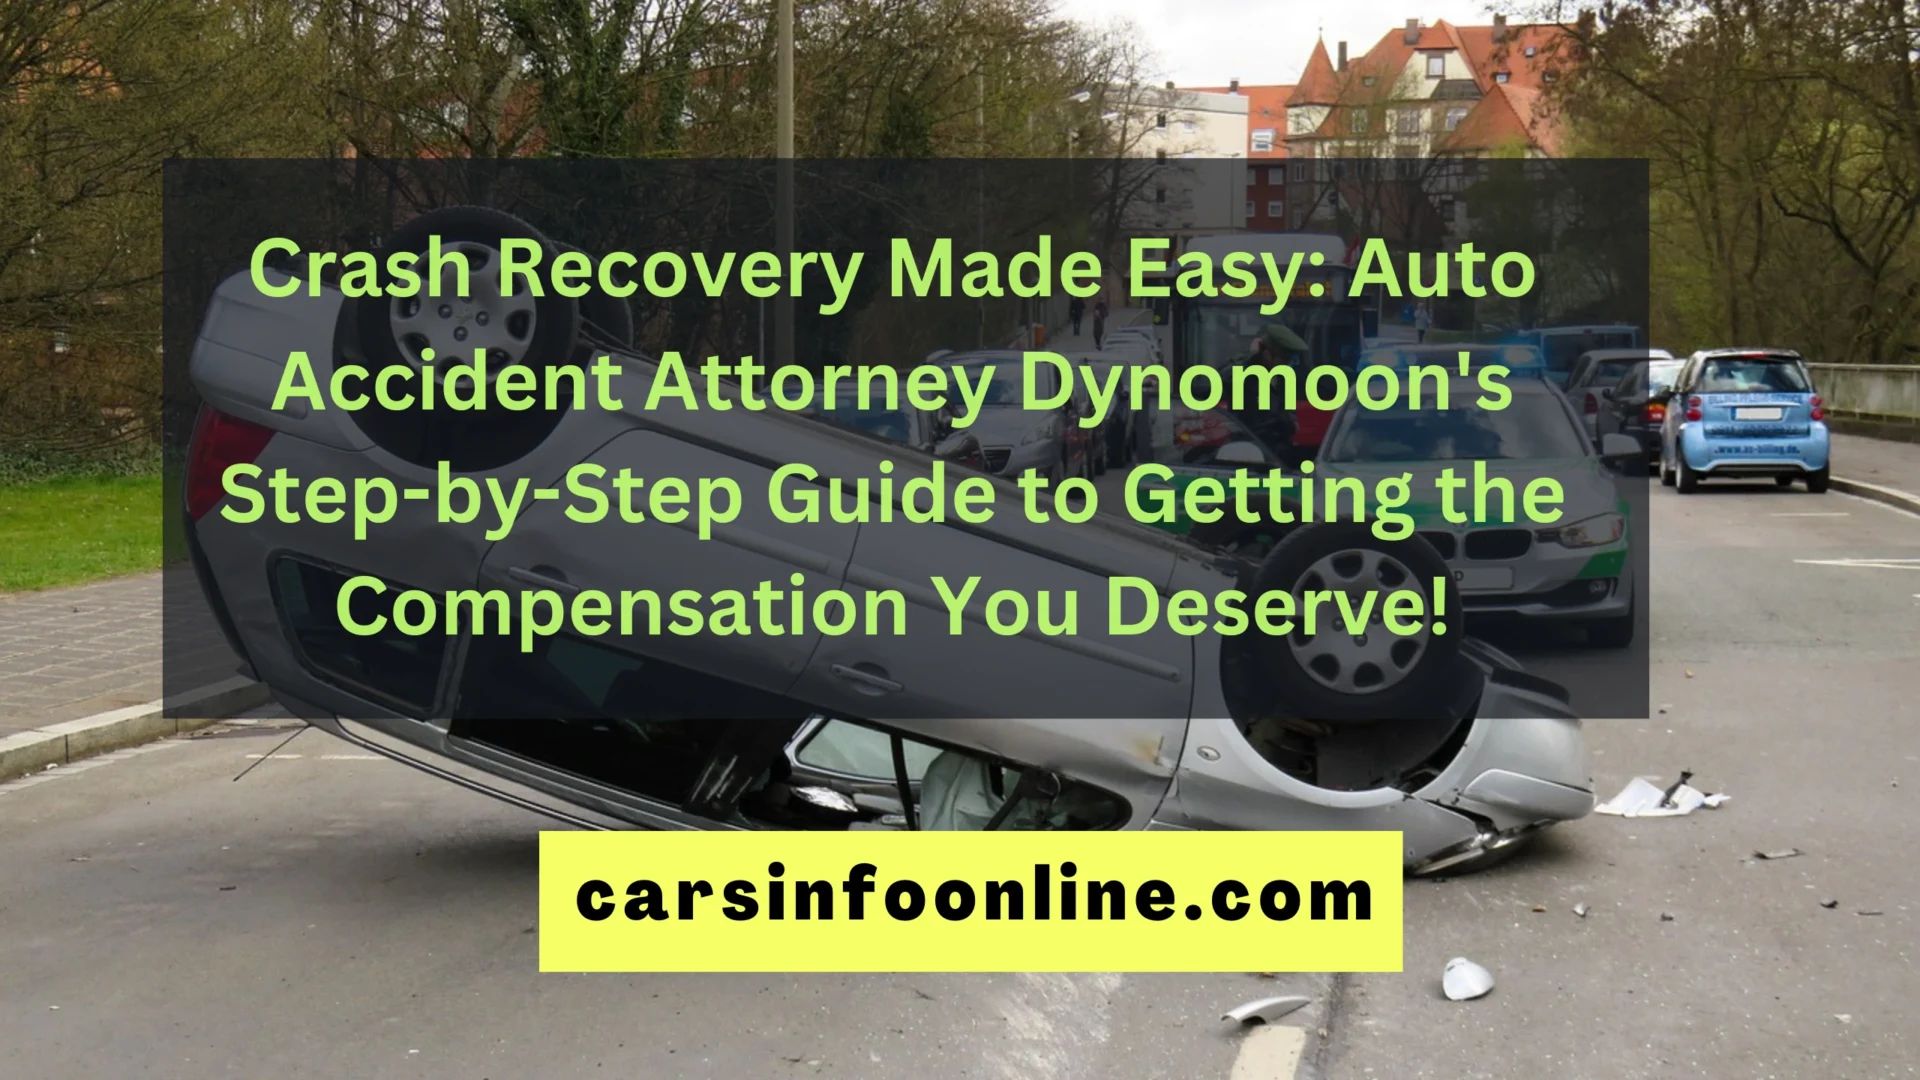 Crash Recovery Made Easy Auto Accident Attorney Dynomoons Step-by-Step Guide to Getting the Compensation You Deserve!